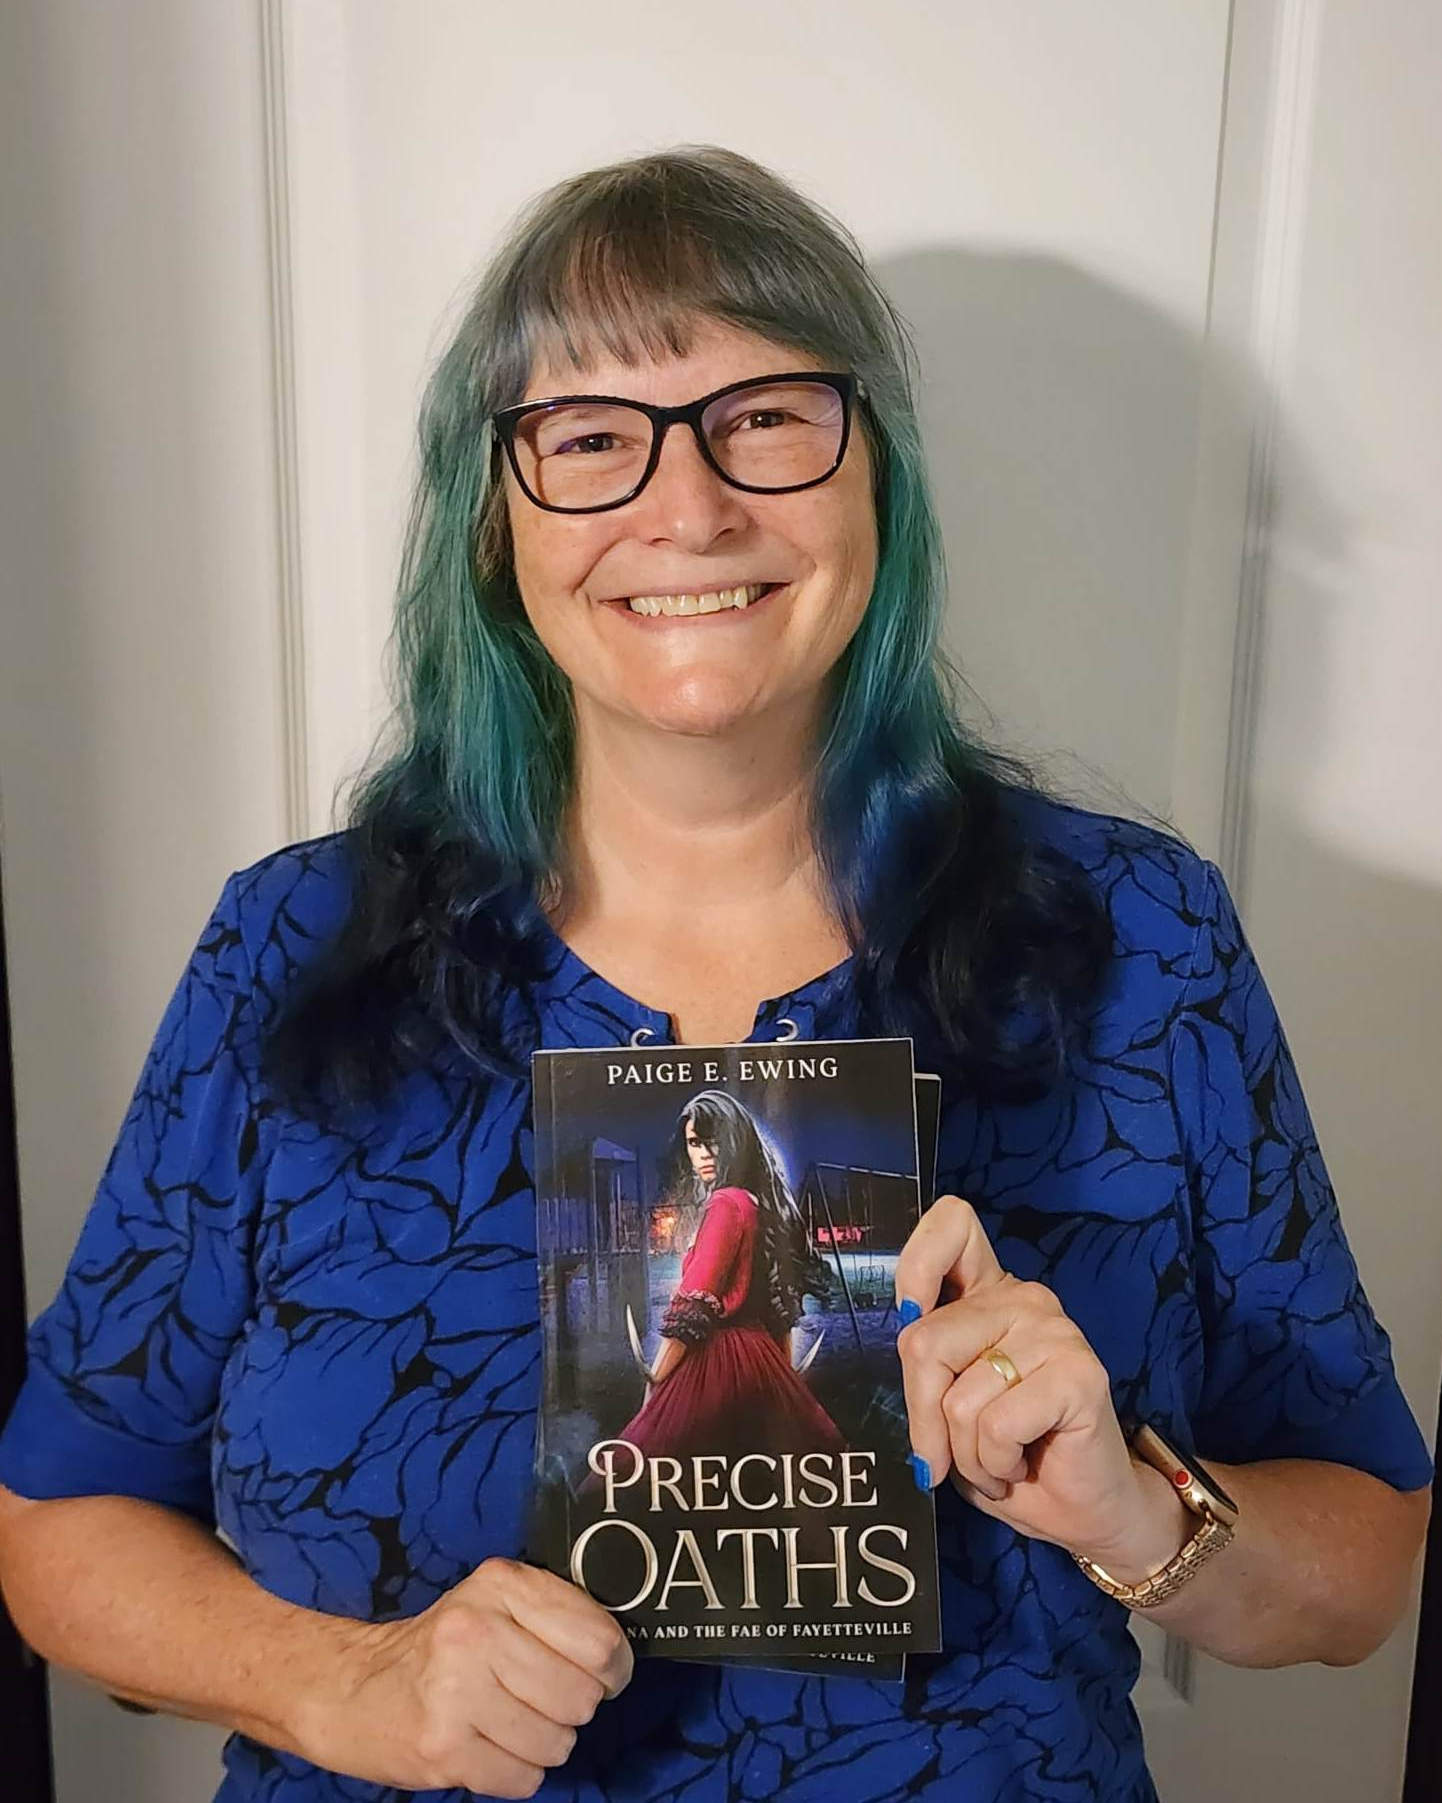 Precise Oaths book held by Paige E. Ewing